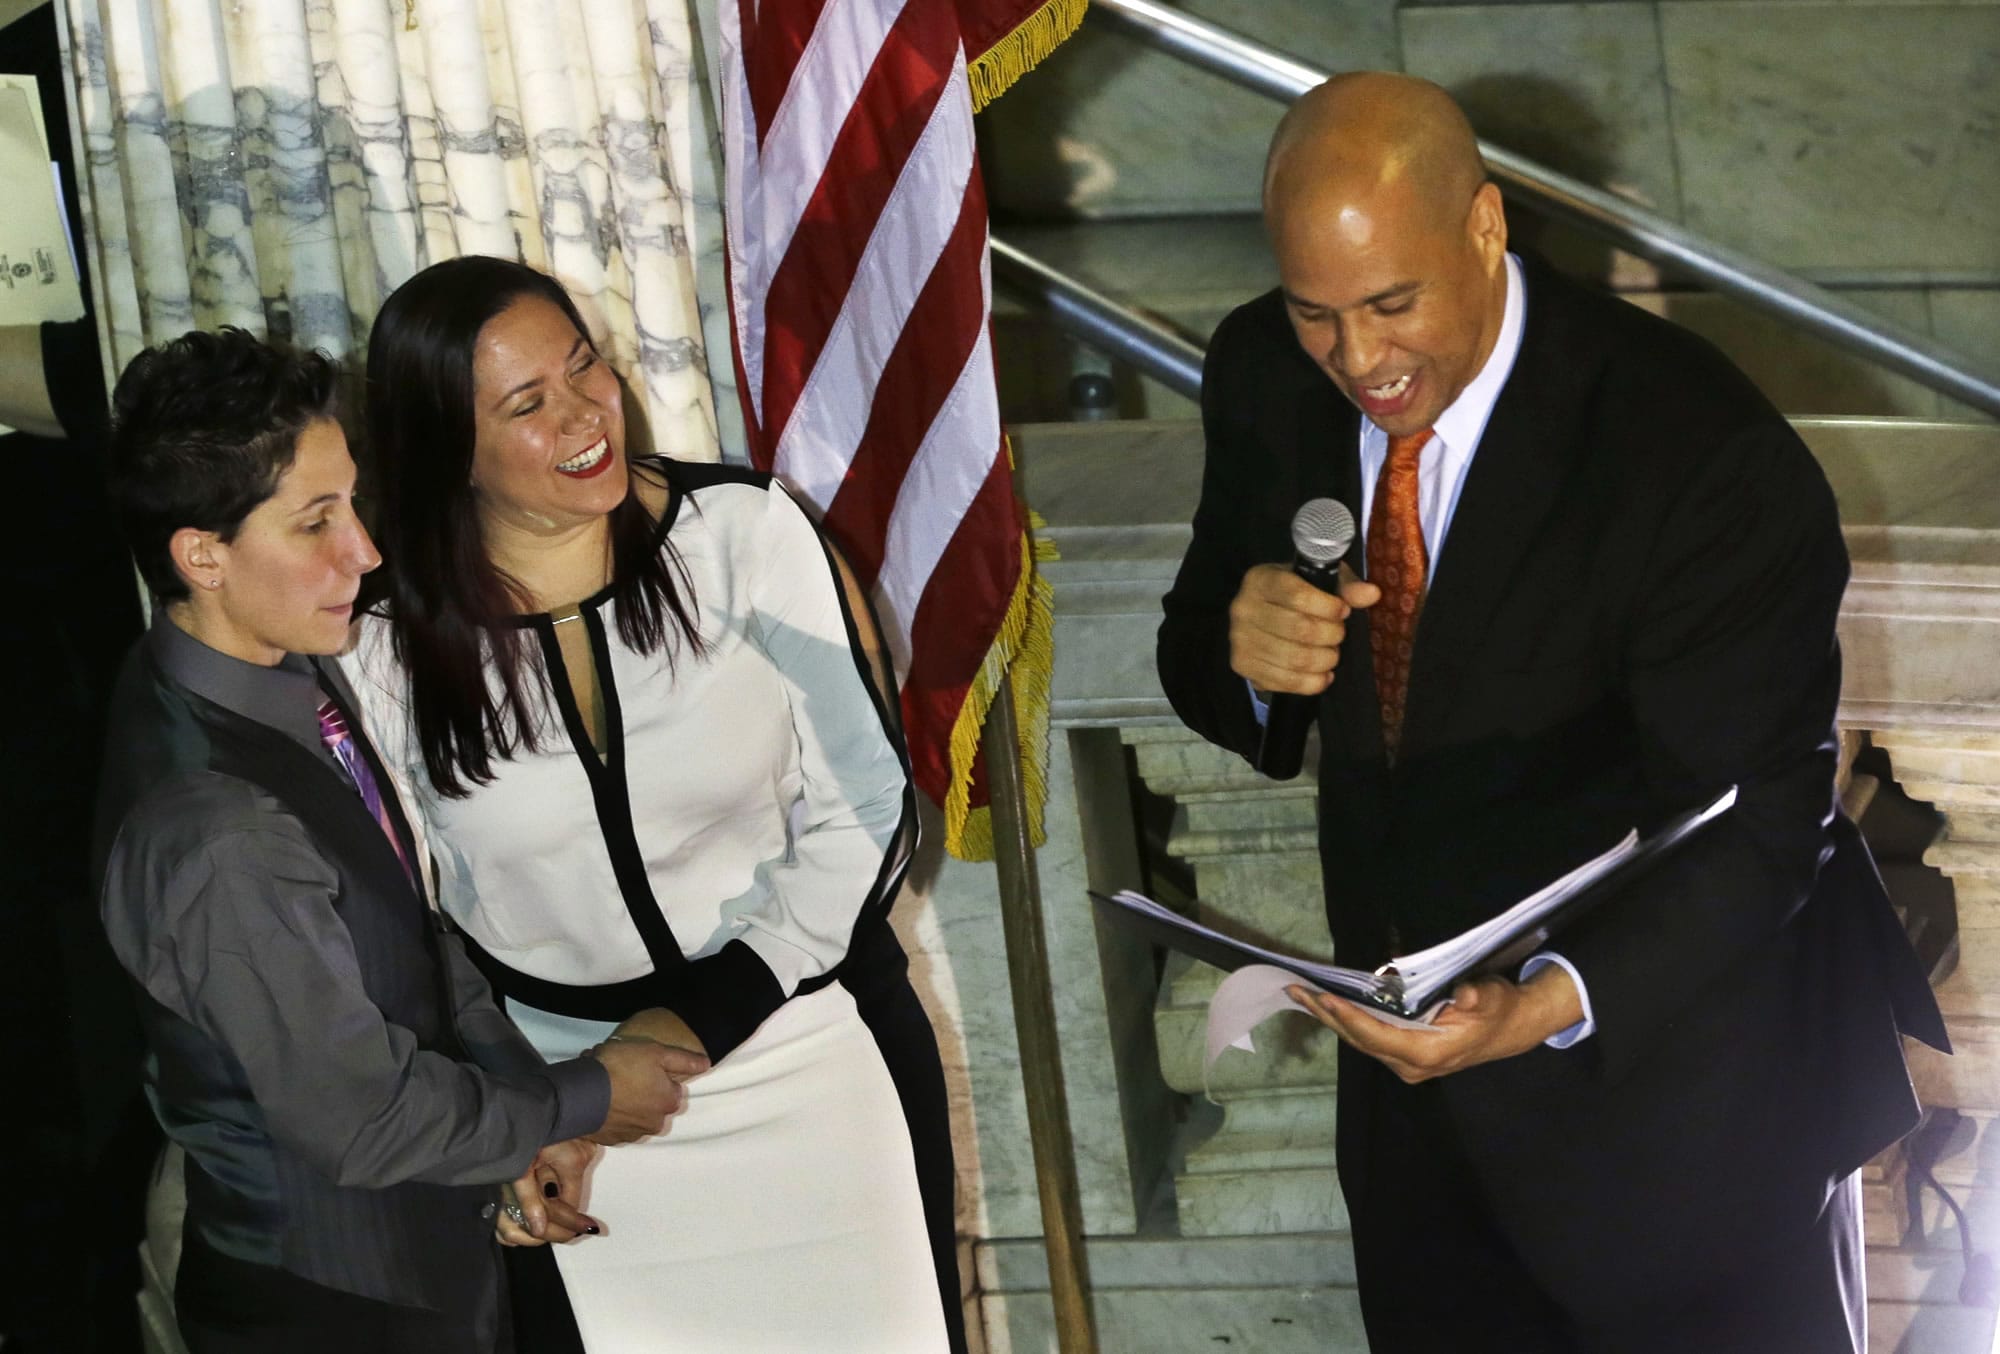 Newark Mayor and Senator-elect Cory Booker, right, officiates the ceremony for the same-sex marriage of Liz Salerno, left, 38, and Gabriela Celeiro, 34, center, at Newark City Hall just after midnight Monday.